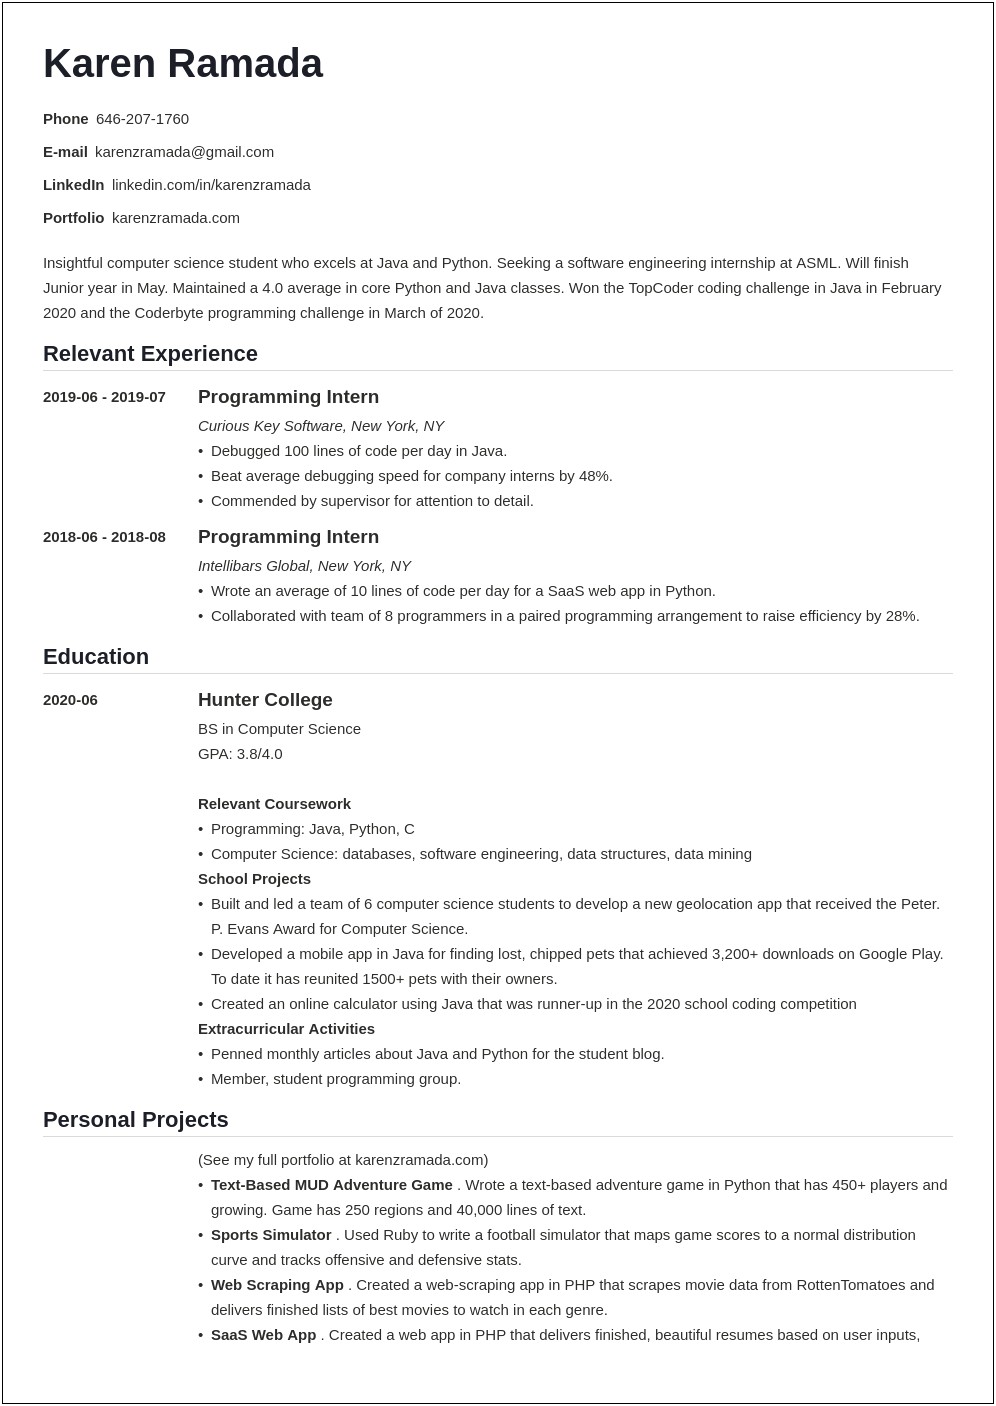 Software Engineer Fresher Resume Objective Examples